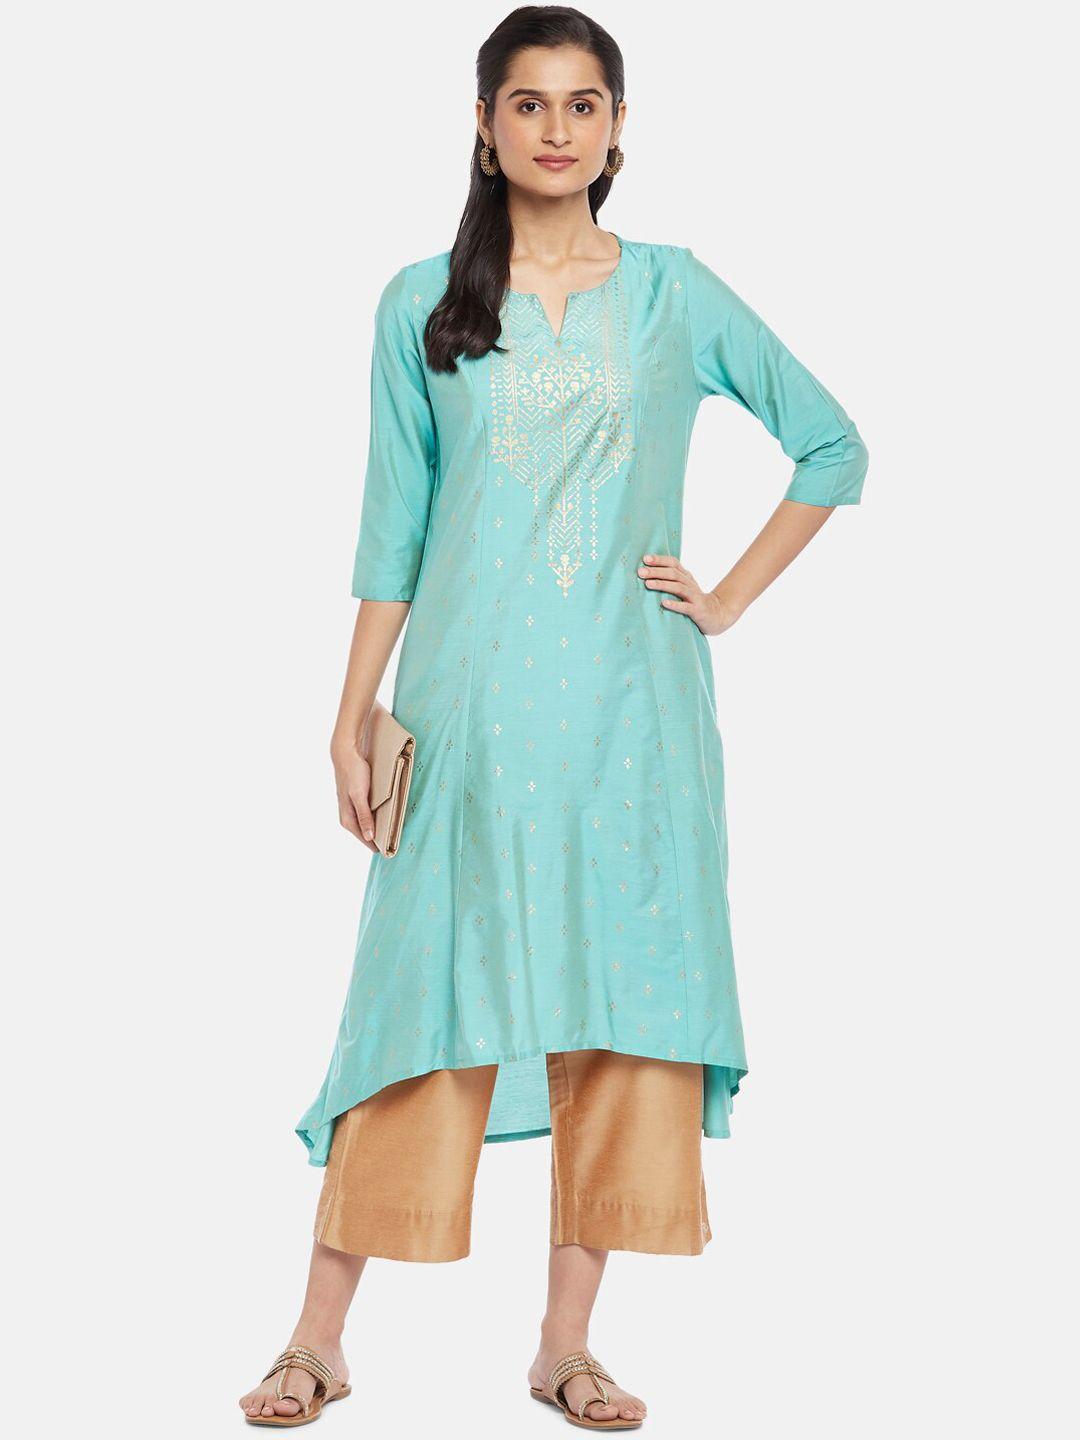 rangmanch by pantaloons women blue & gold-toned floral embroidered kurta